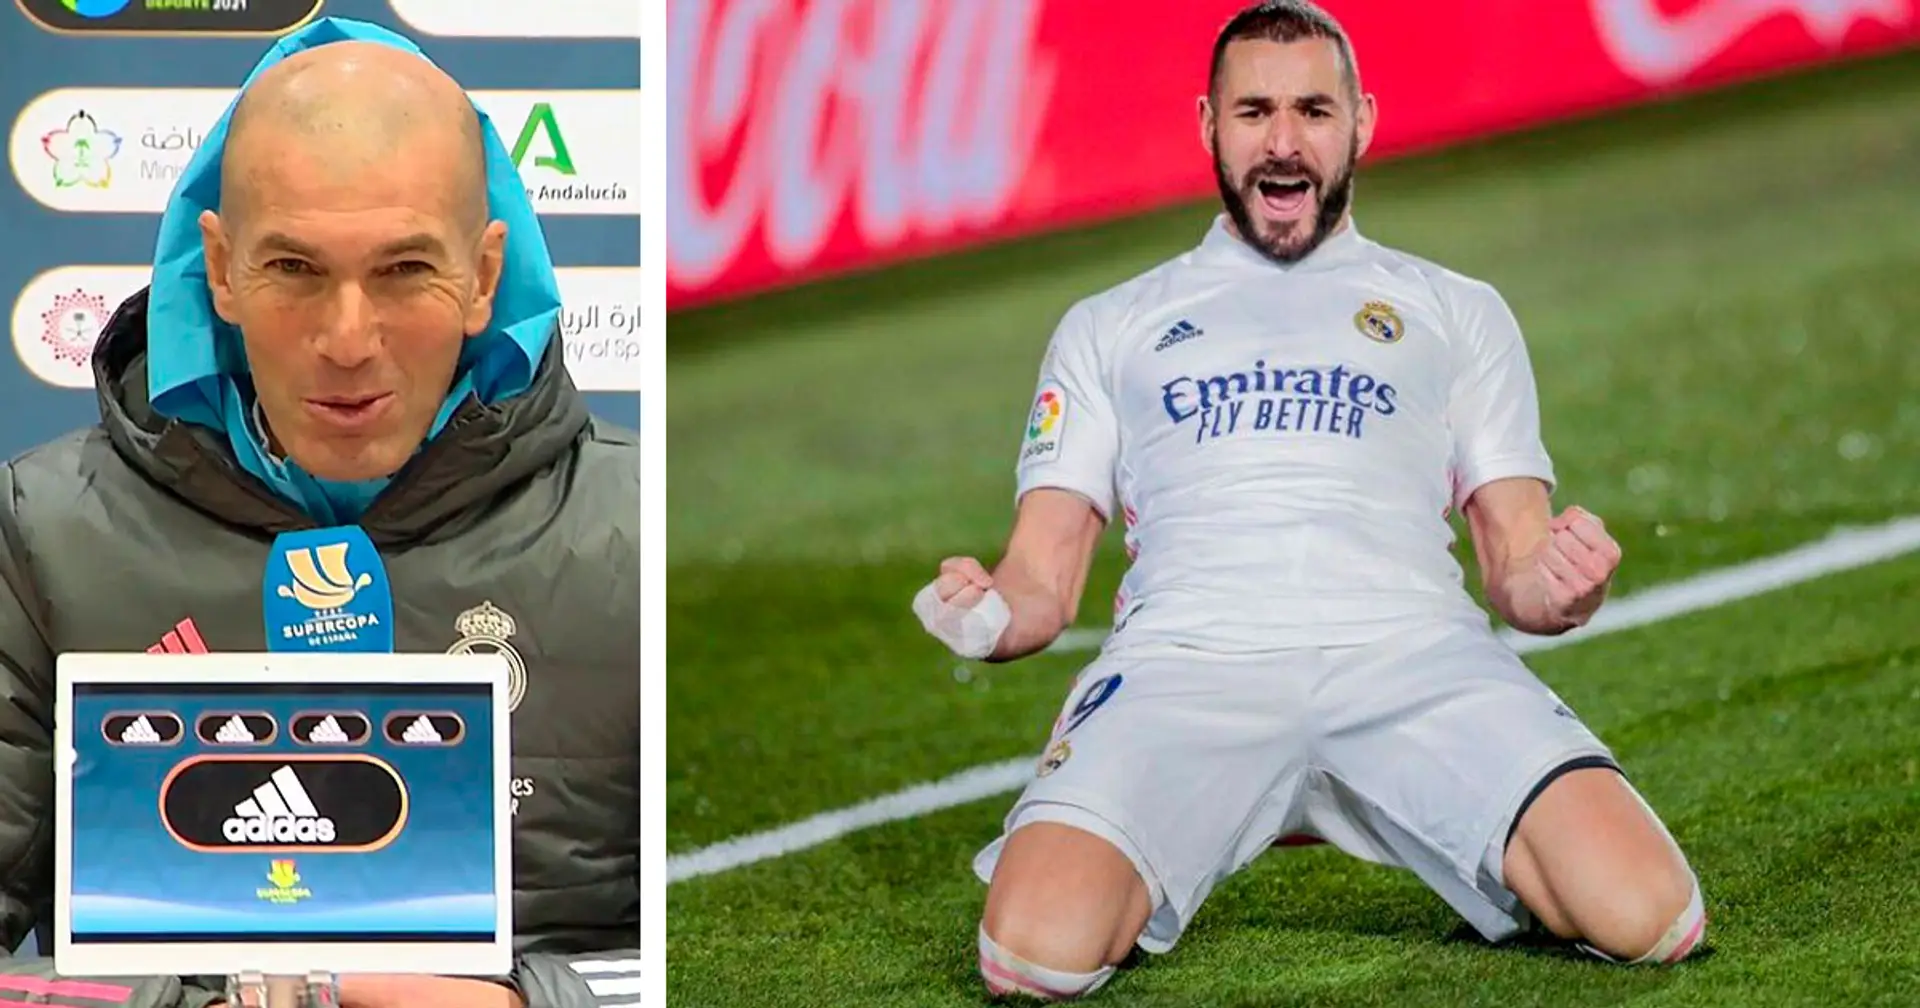 Zidane: 'If Benzema comes back to French national team, it'll be good news'